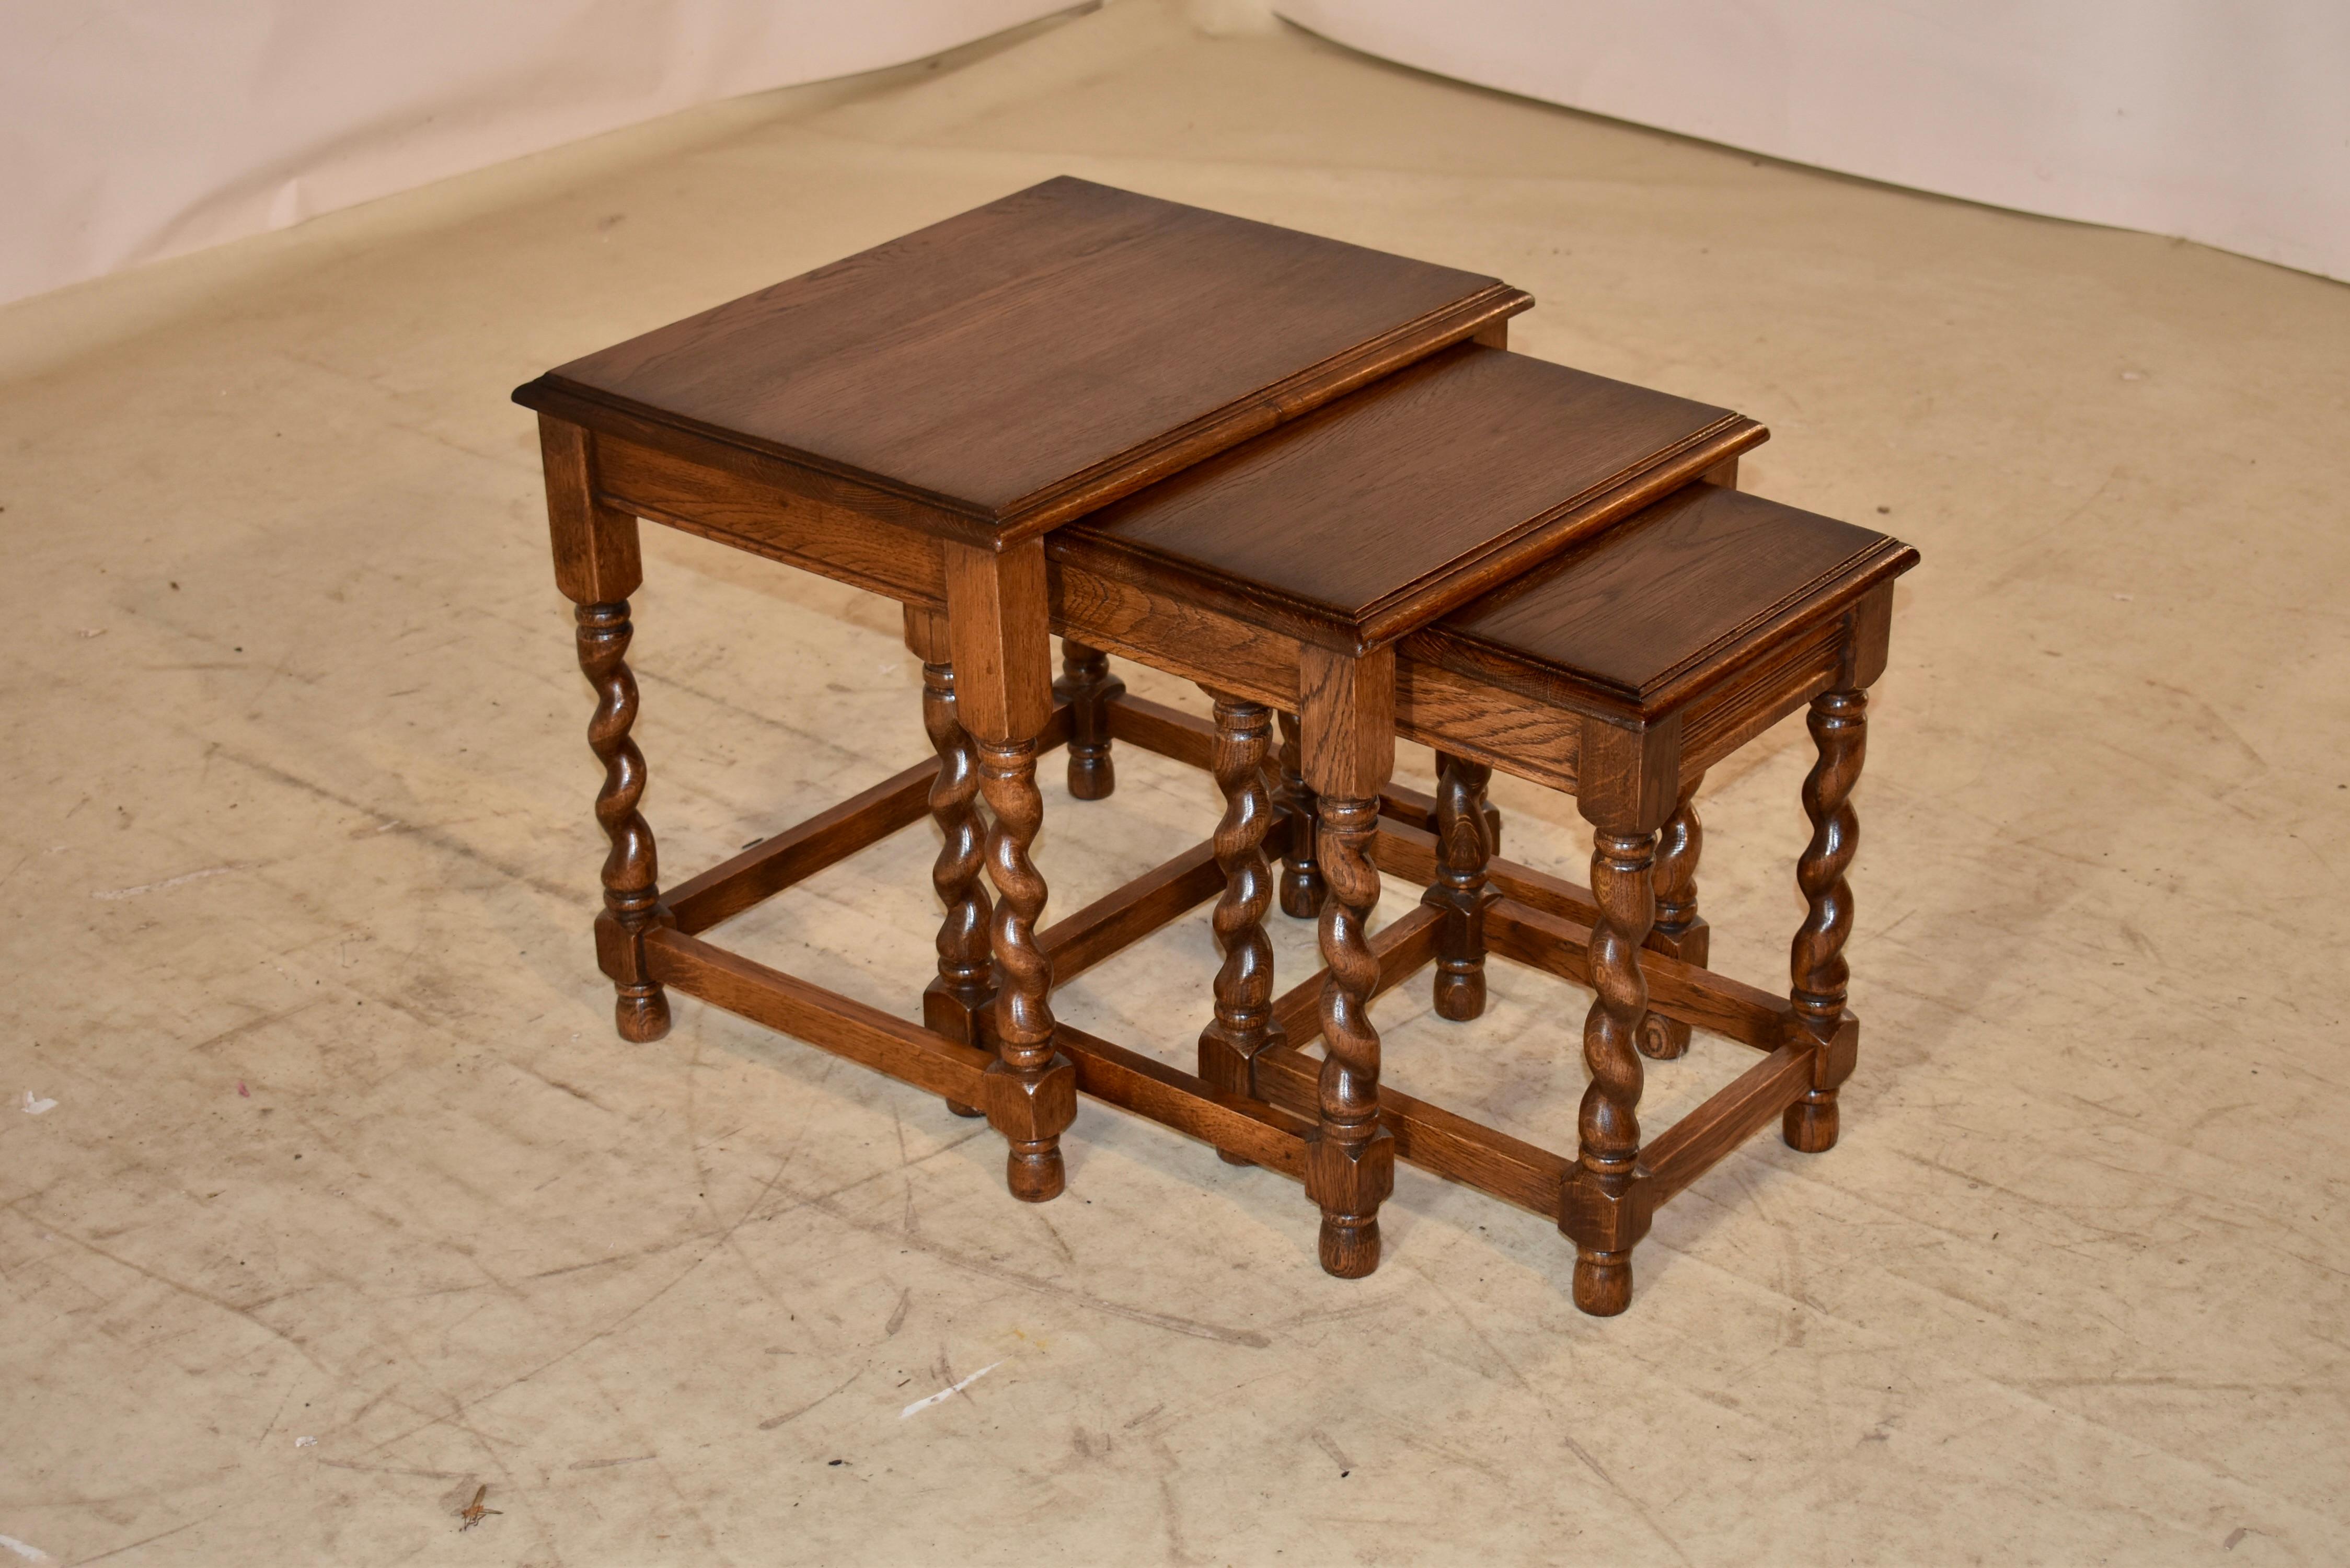 Edwardian set of three nesting oak tables from England.  The tables have beveled edges around the tops, following down to simple aprons, and are supported on hand turned barley twist legs, joined by simple stretchers.  The smallest table measures